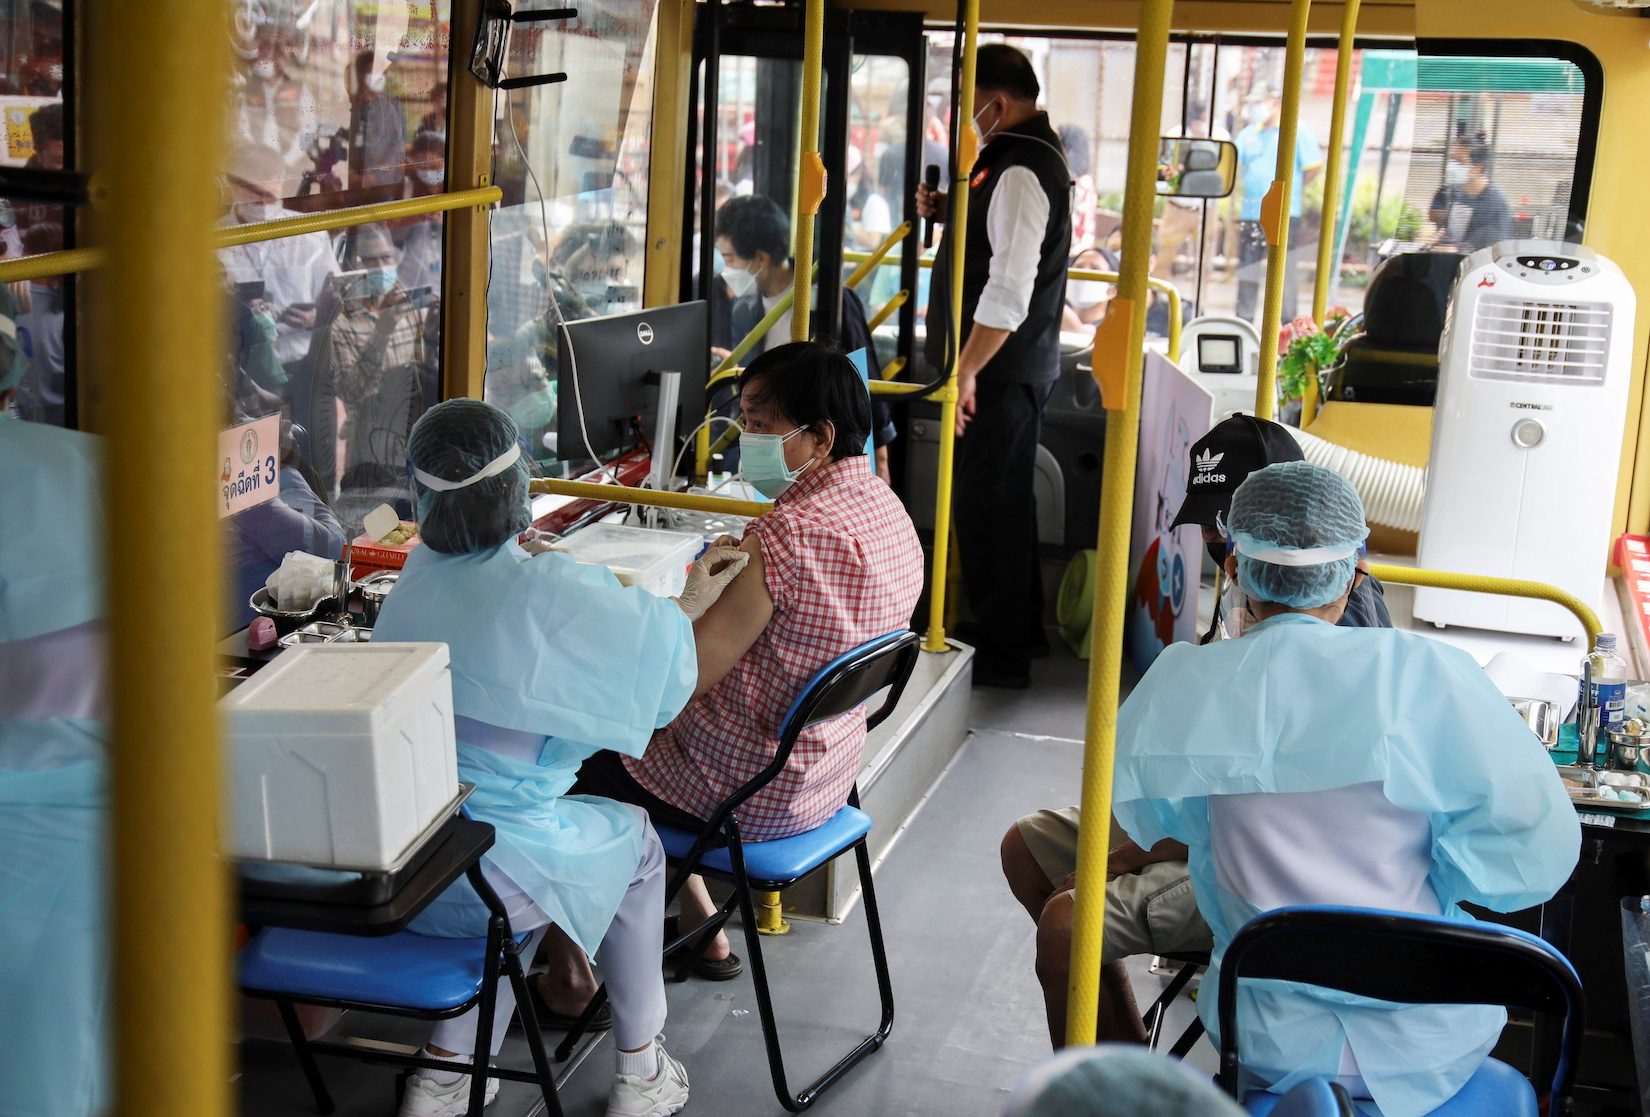 All aboard! Thai bus brings vaccines to Bangkok’s vulnerable